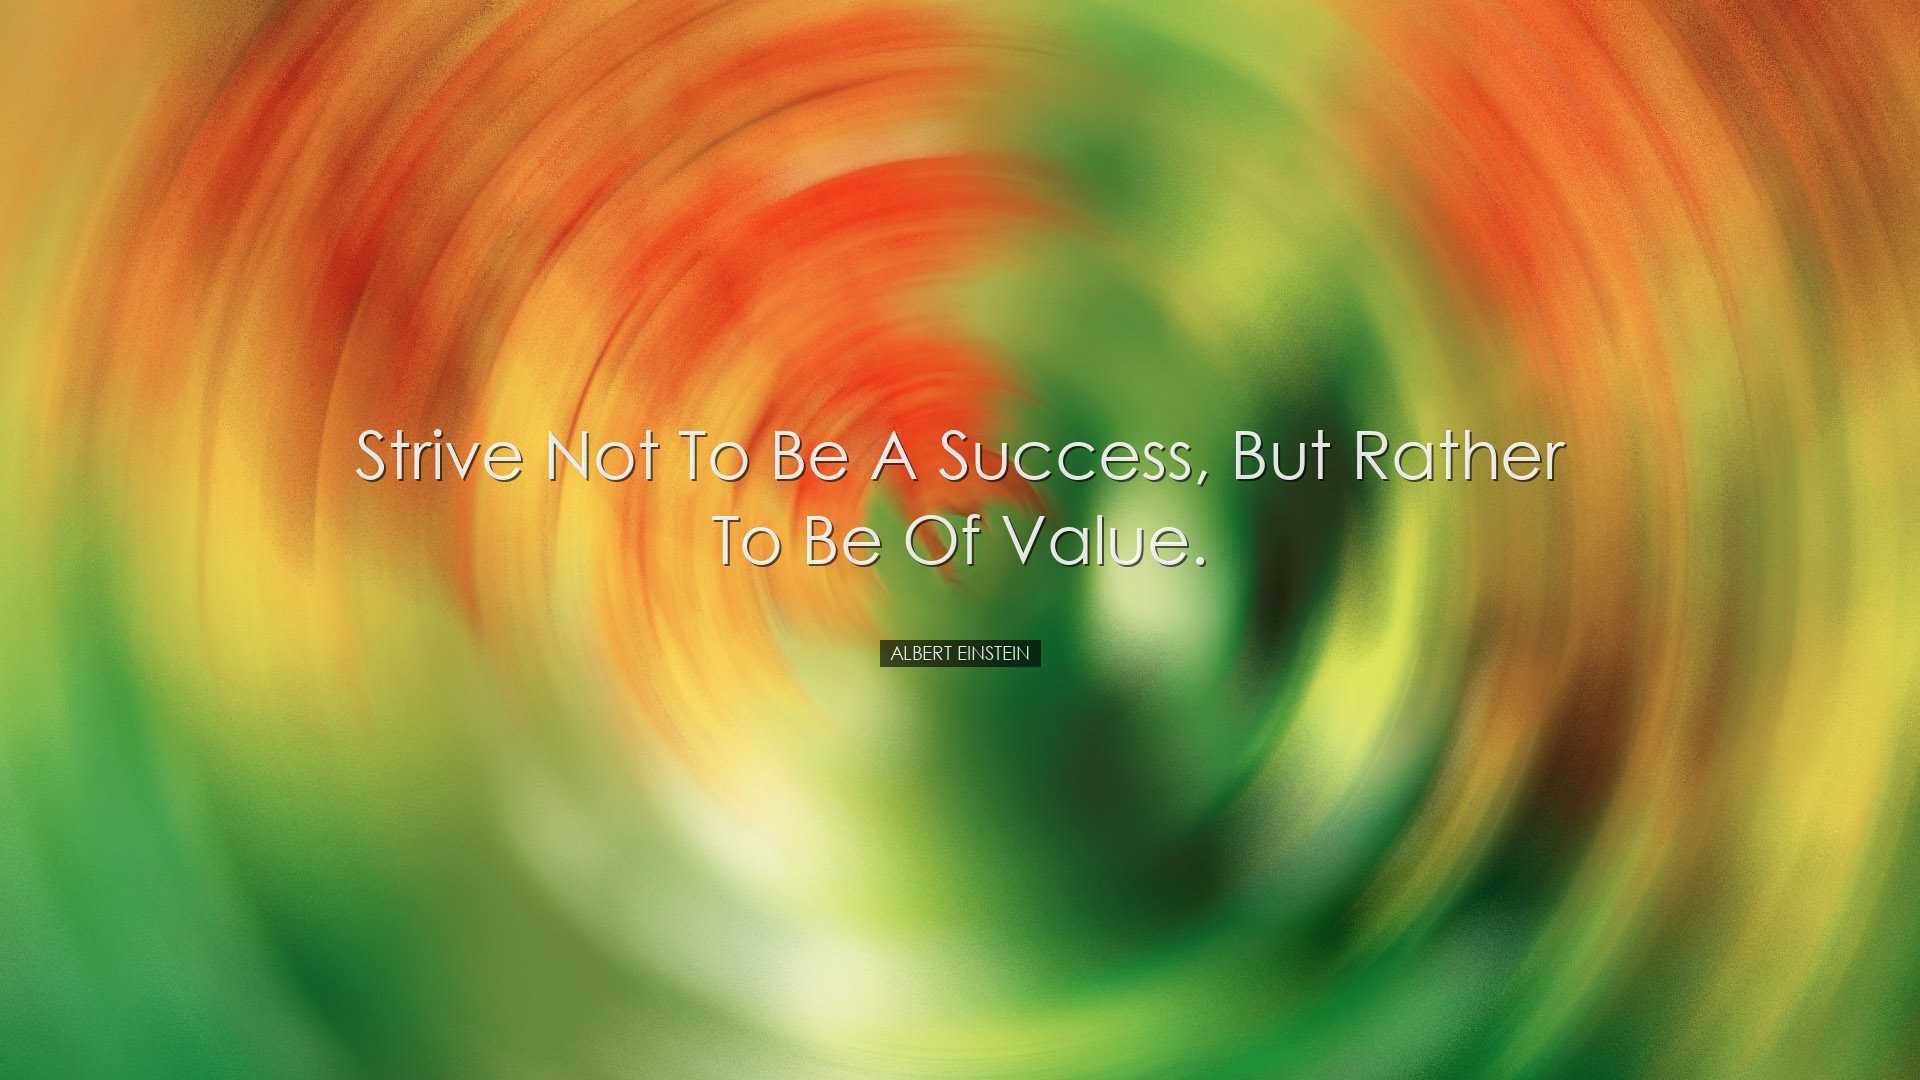 Strive not to be a success, but rather to be of value. - Albert Ei